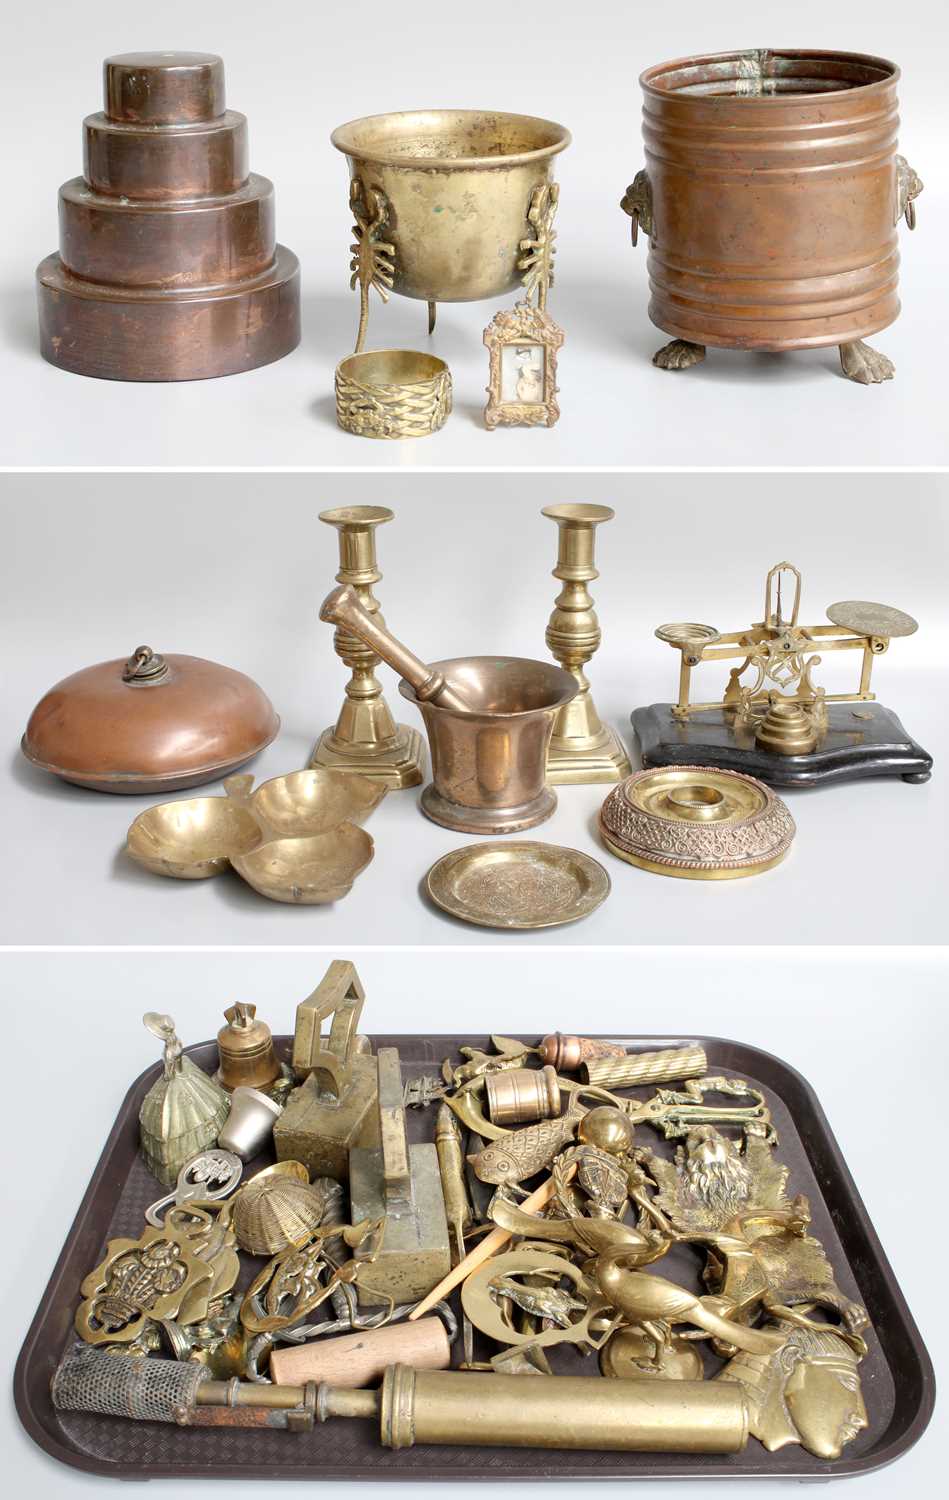 Assorted Brass, Copper and Mixed Metalwares, including a set of postal scales, a pestle and